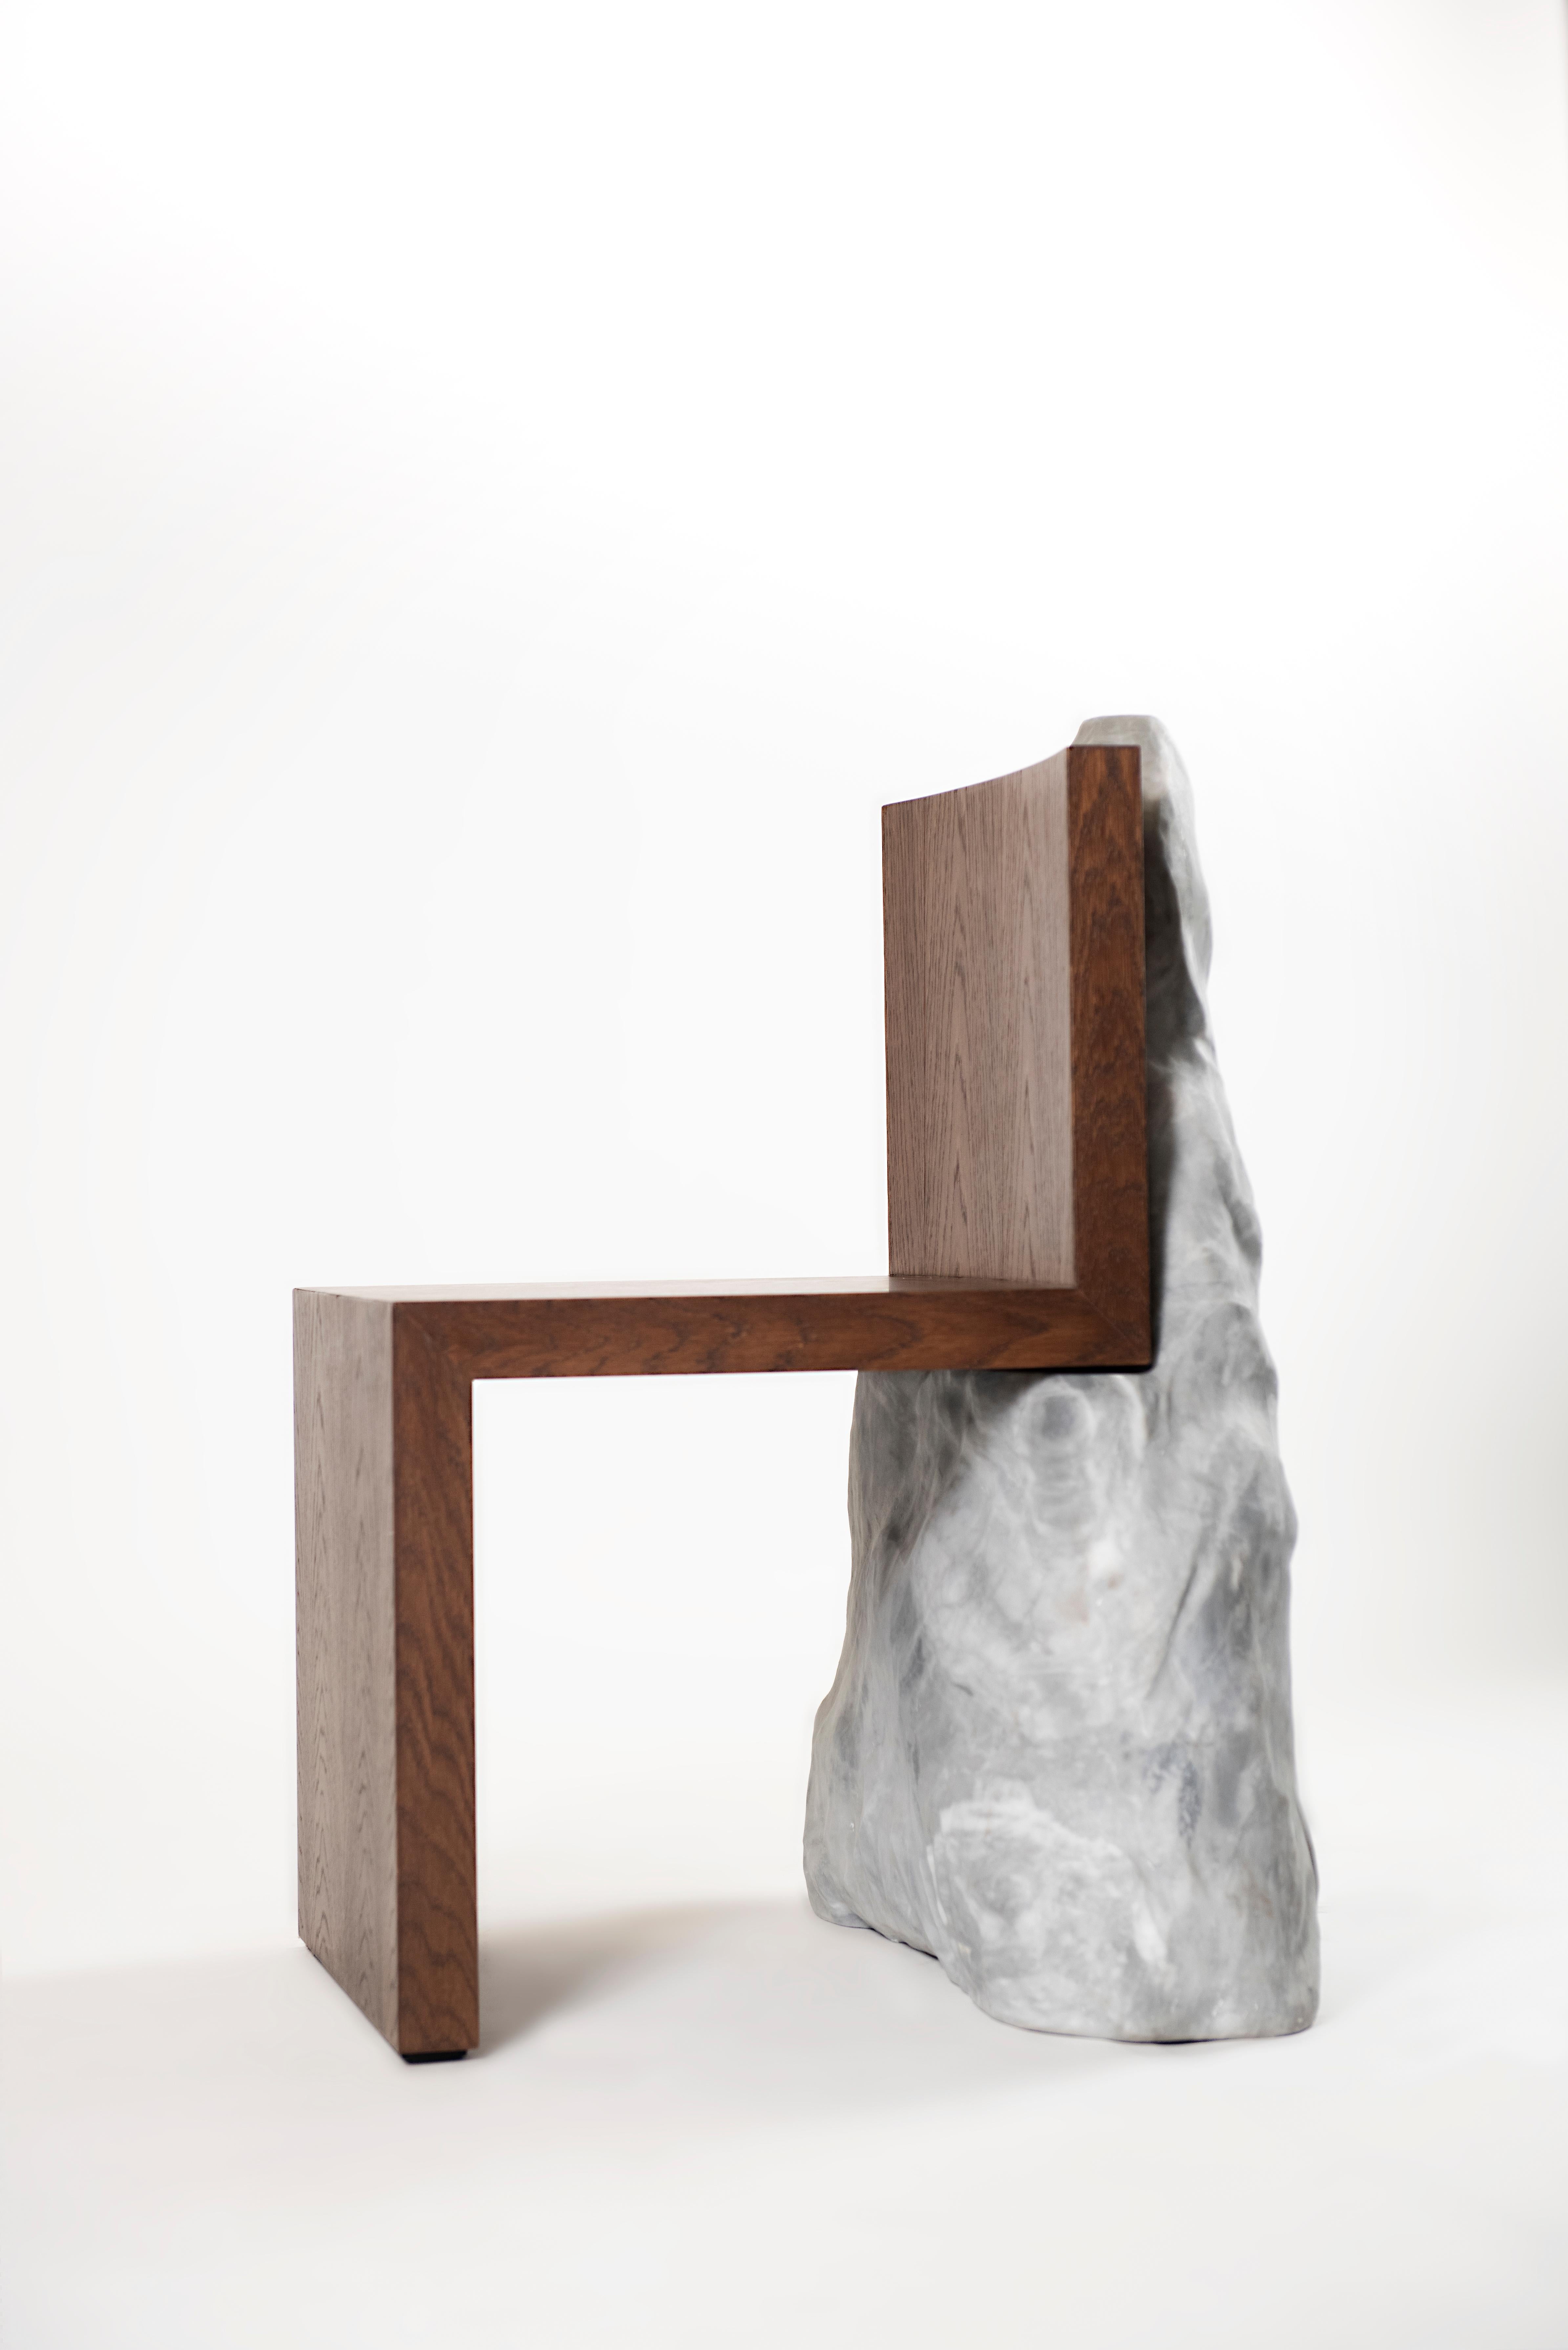 High Atus Chair by Bea Interiors
One of a Kind.
Dimensions: D54 x W 65 x H 86 cm.
Materials: Black walnut wood and marble. 

The High Atus Chair was designed with an eye for the raw strength of marble sourced from Portugal, which has been